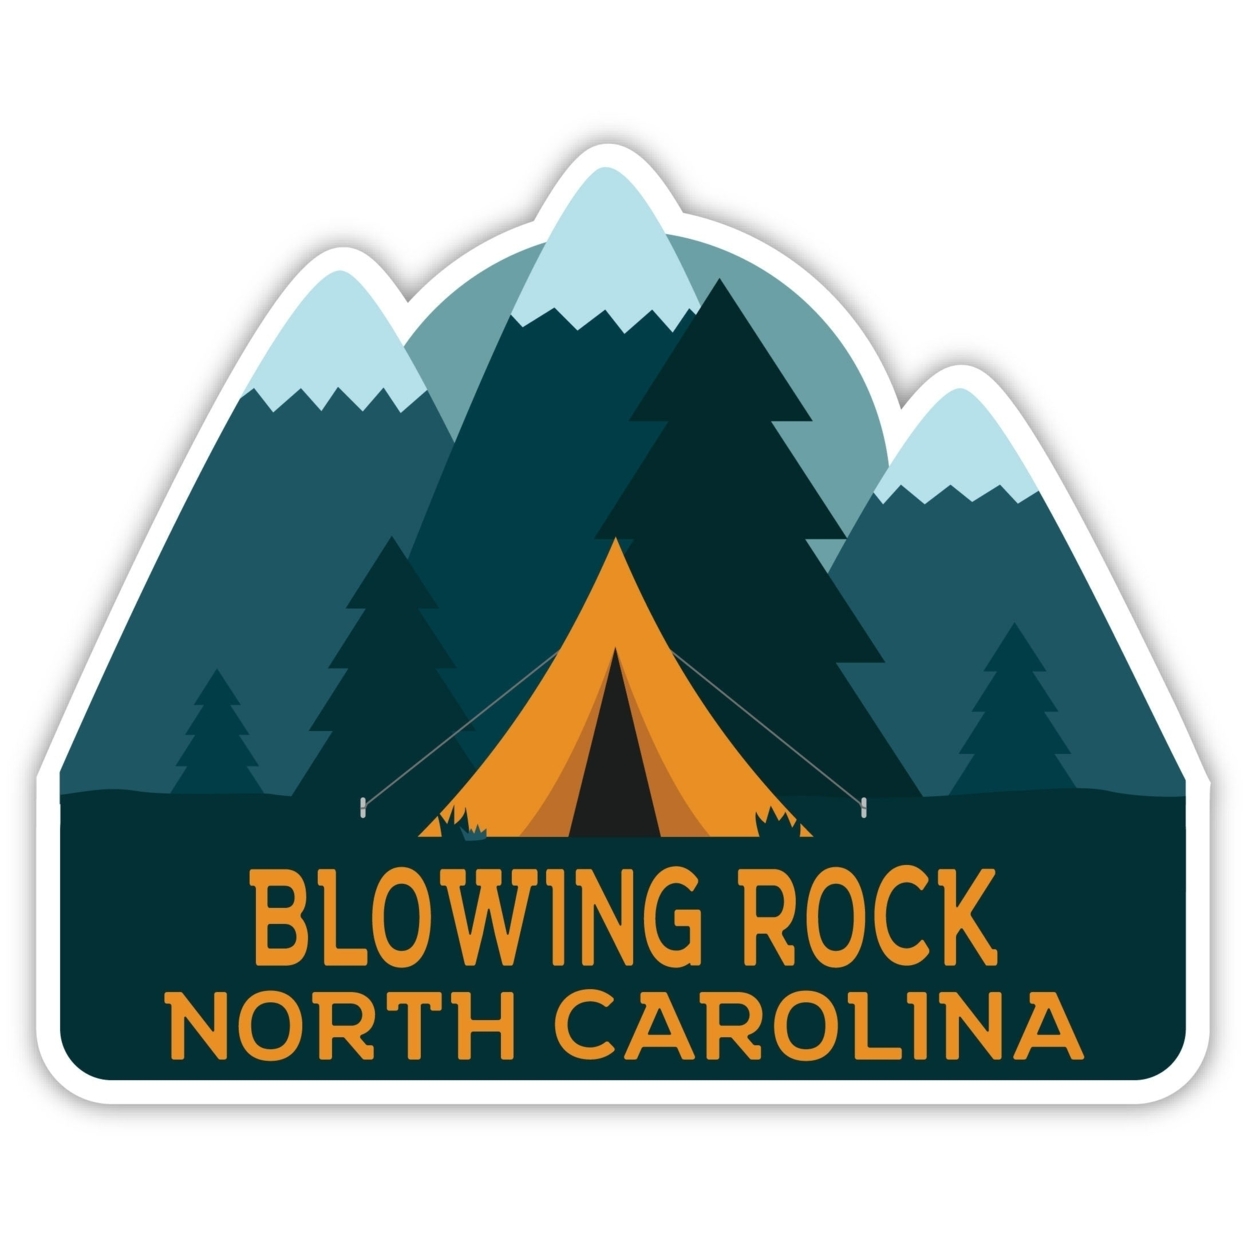 Blowing Rock North Carolina Souvenir Decorative Stickers (Choose Theme And Size) - 4-Pack, 2-Inch, Camp Life